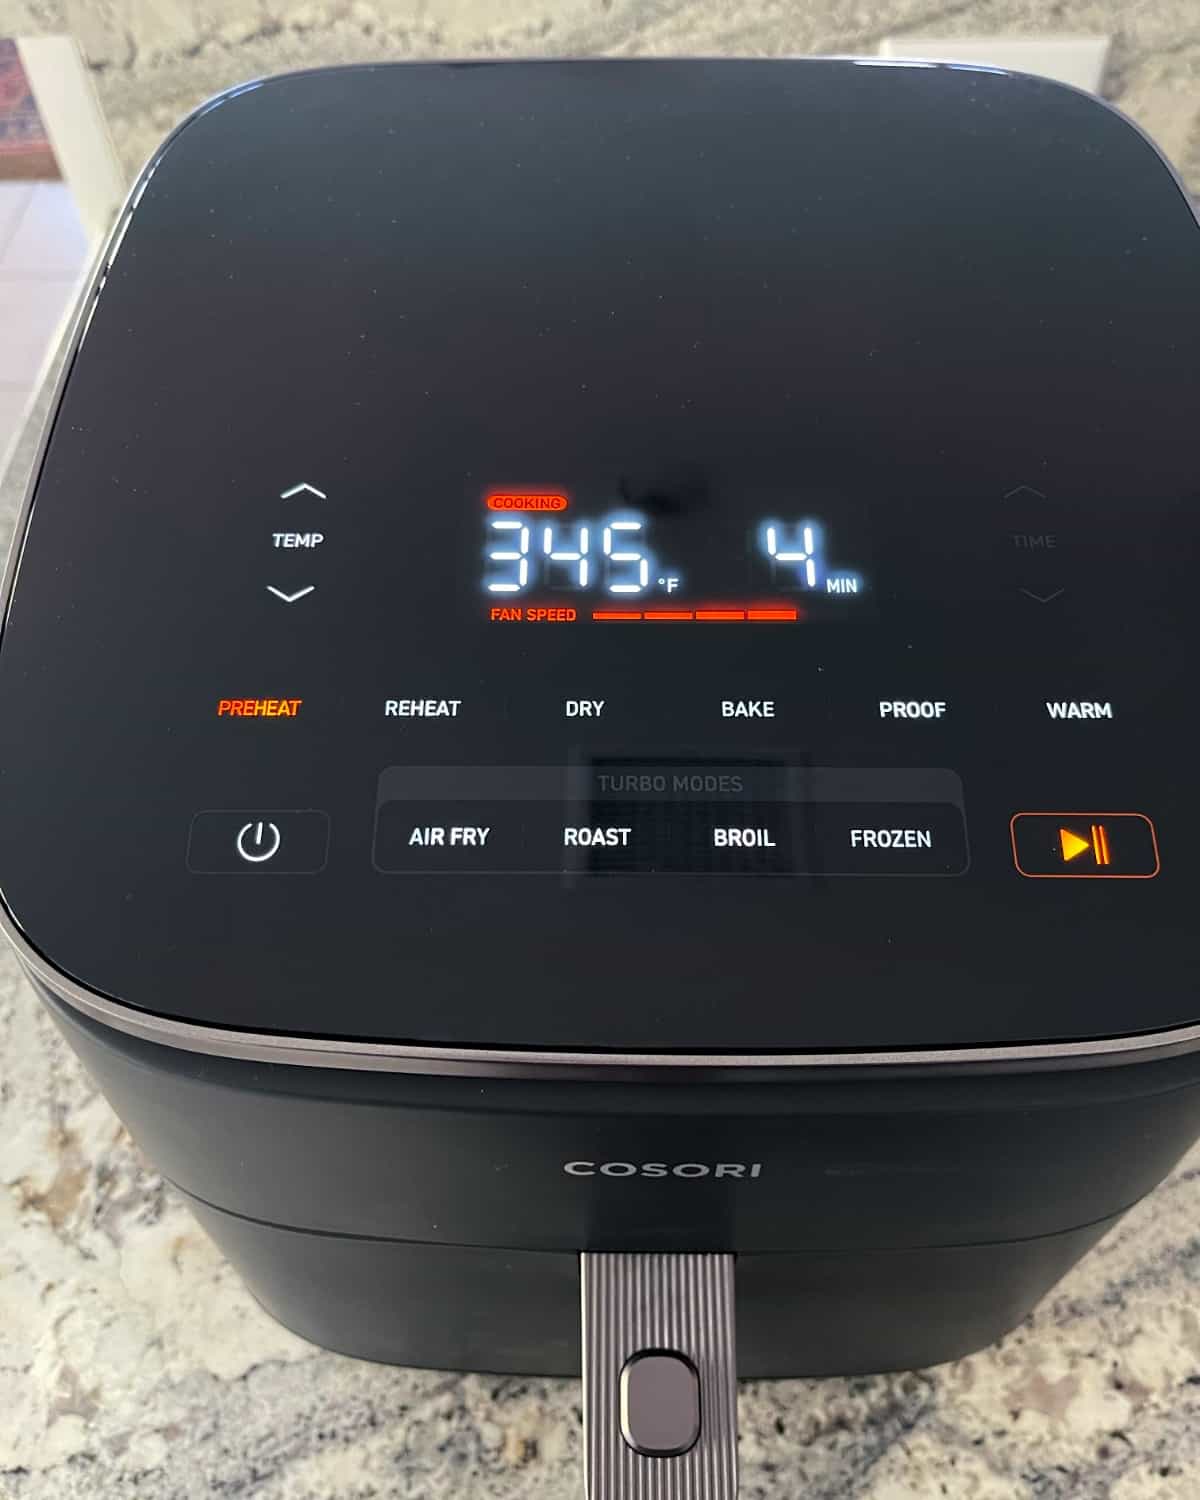 Preheating Cosori TurboBlase Air Fryer at 345F degrees for 4 minutes.